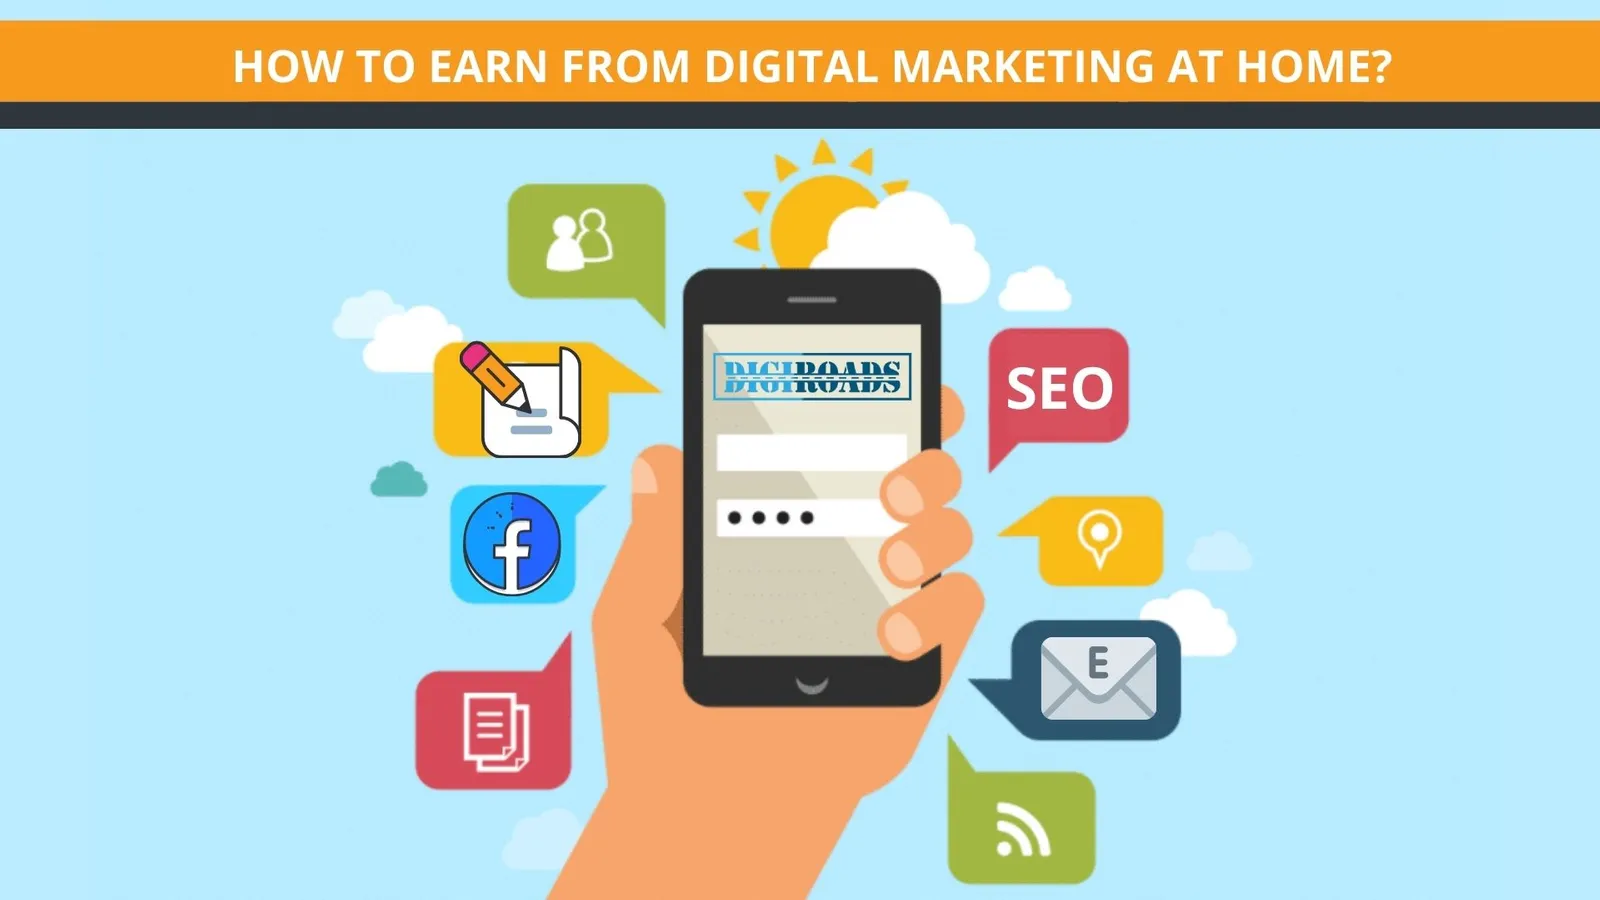 How to earn money from digital marketing by sitting at home